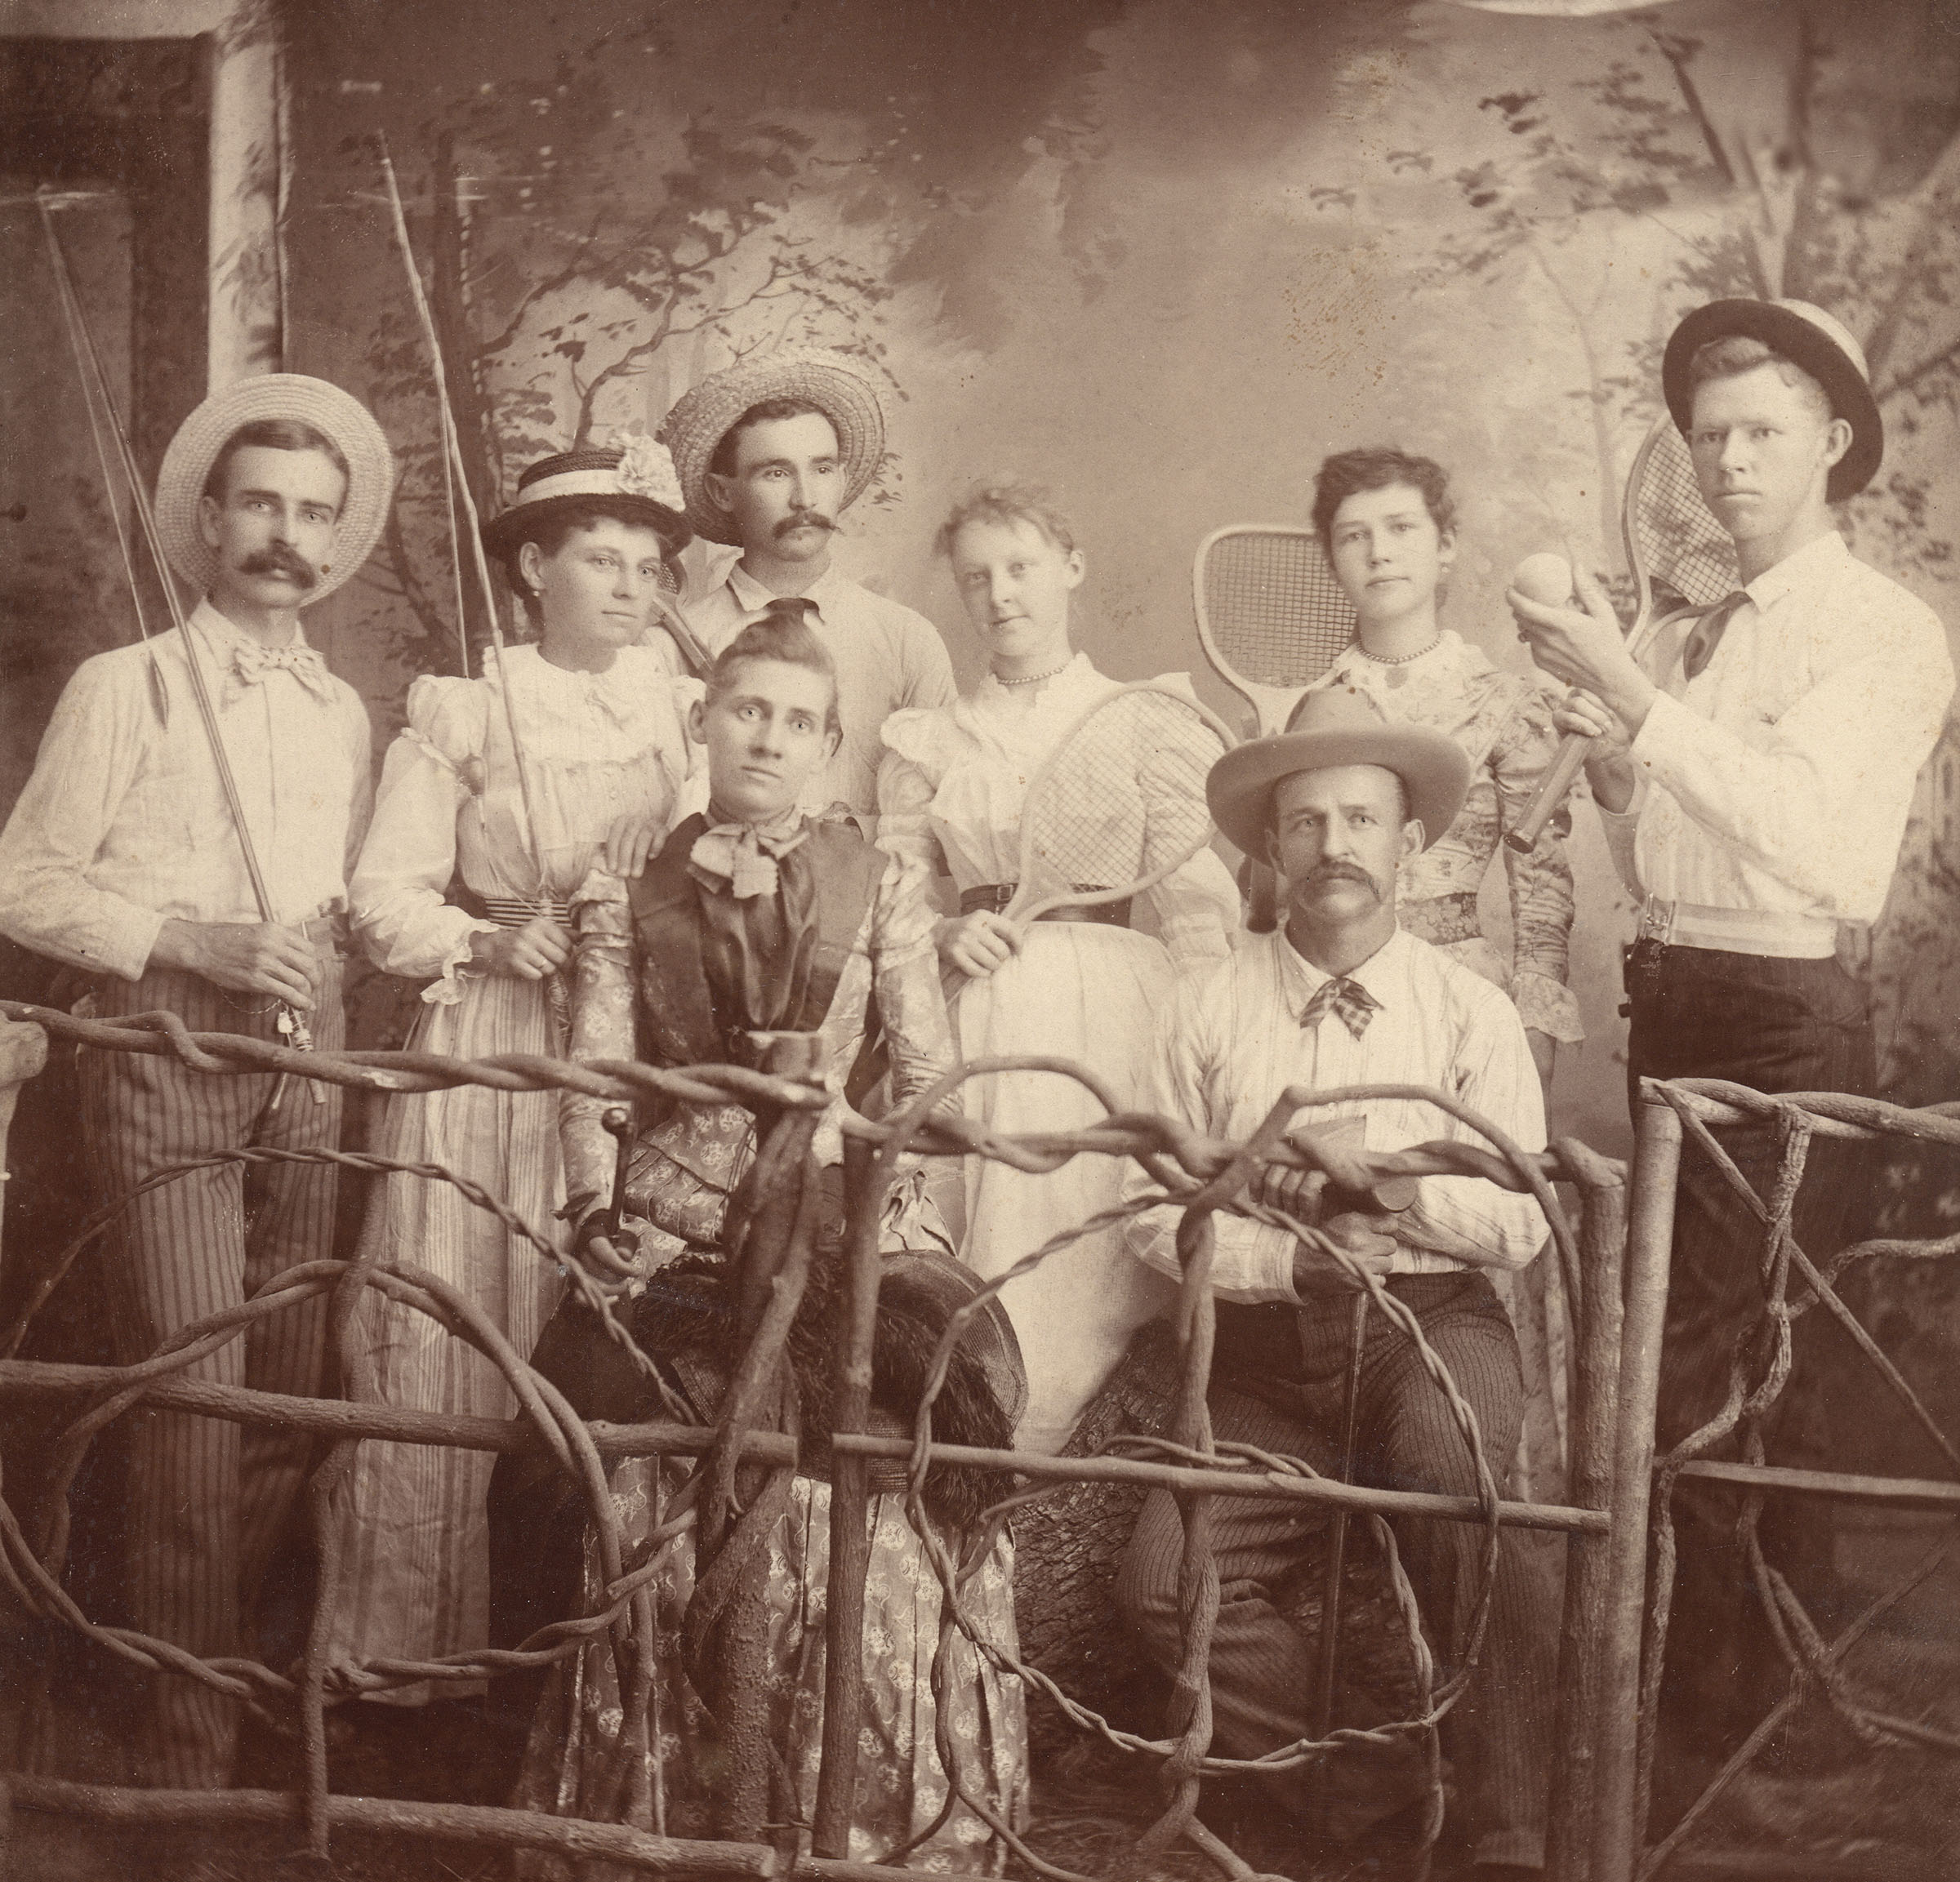 A group of people use props and funny faces in a vintage photo, including fishing poles and tennis rackets